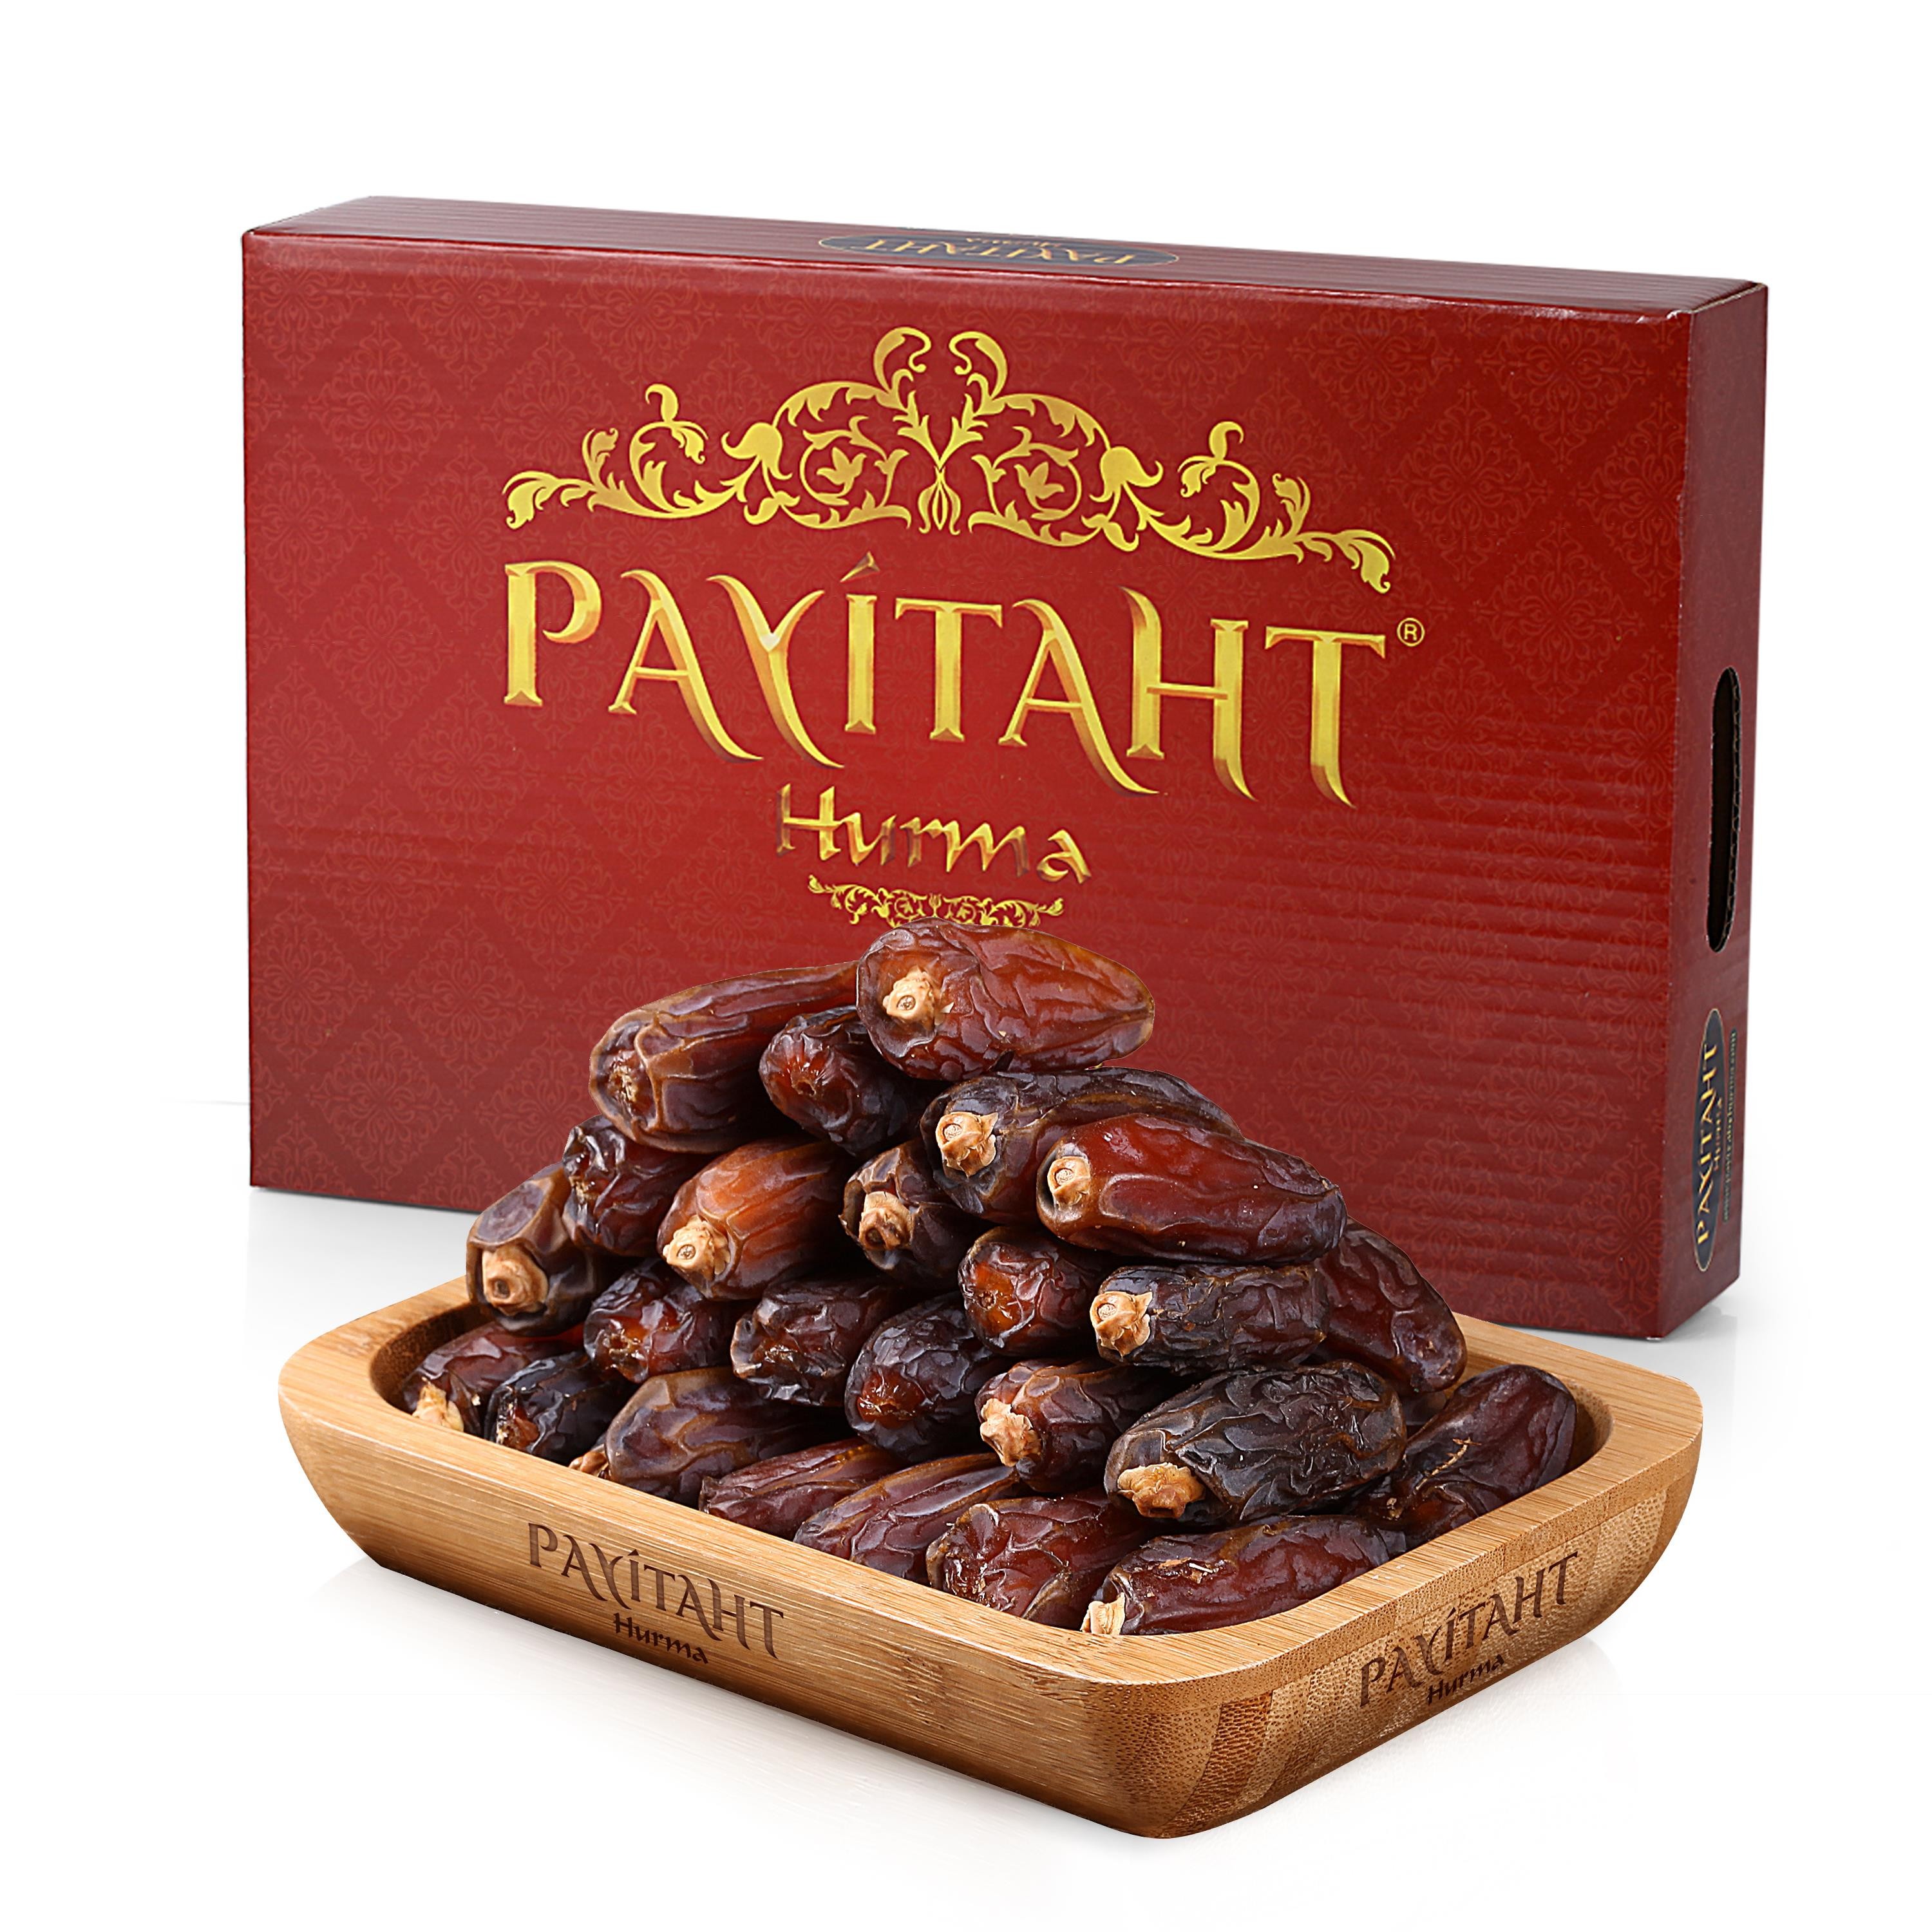 PAYİTAHT HURMA MEDINA MEBRUM WOODEN DOUBLE DATE NEW PRODUCT 3 KG PACKAGE"